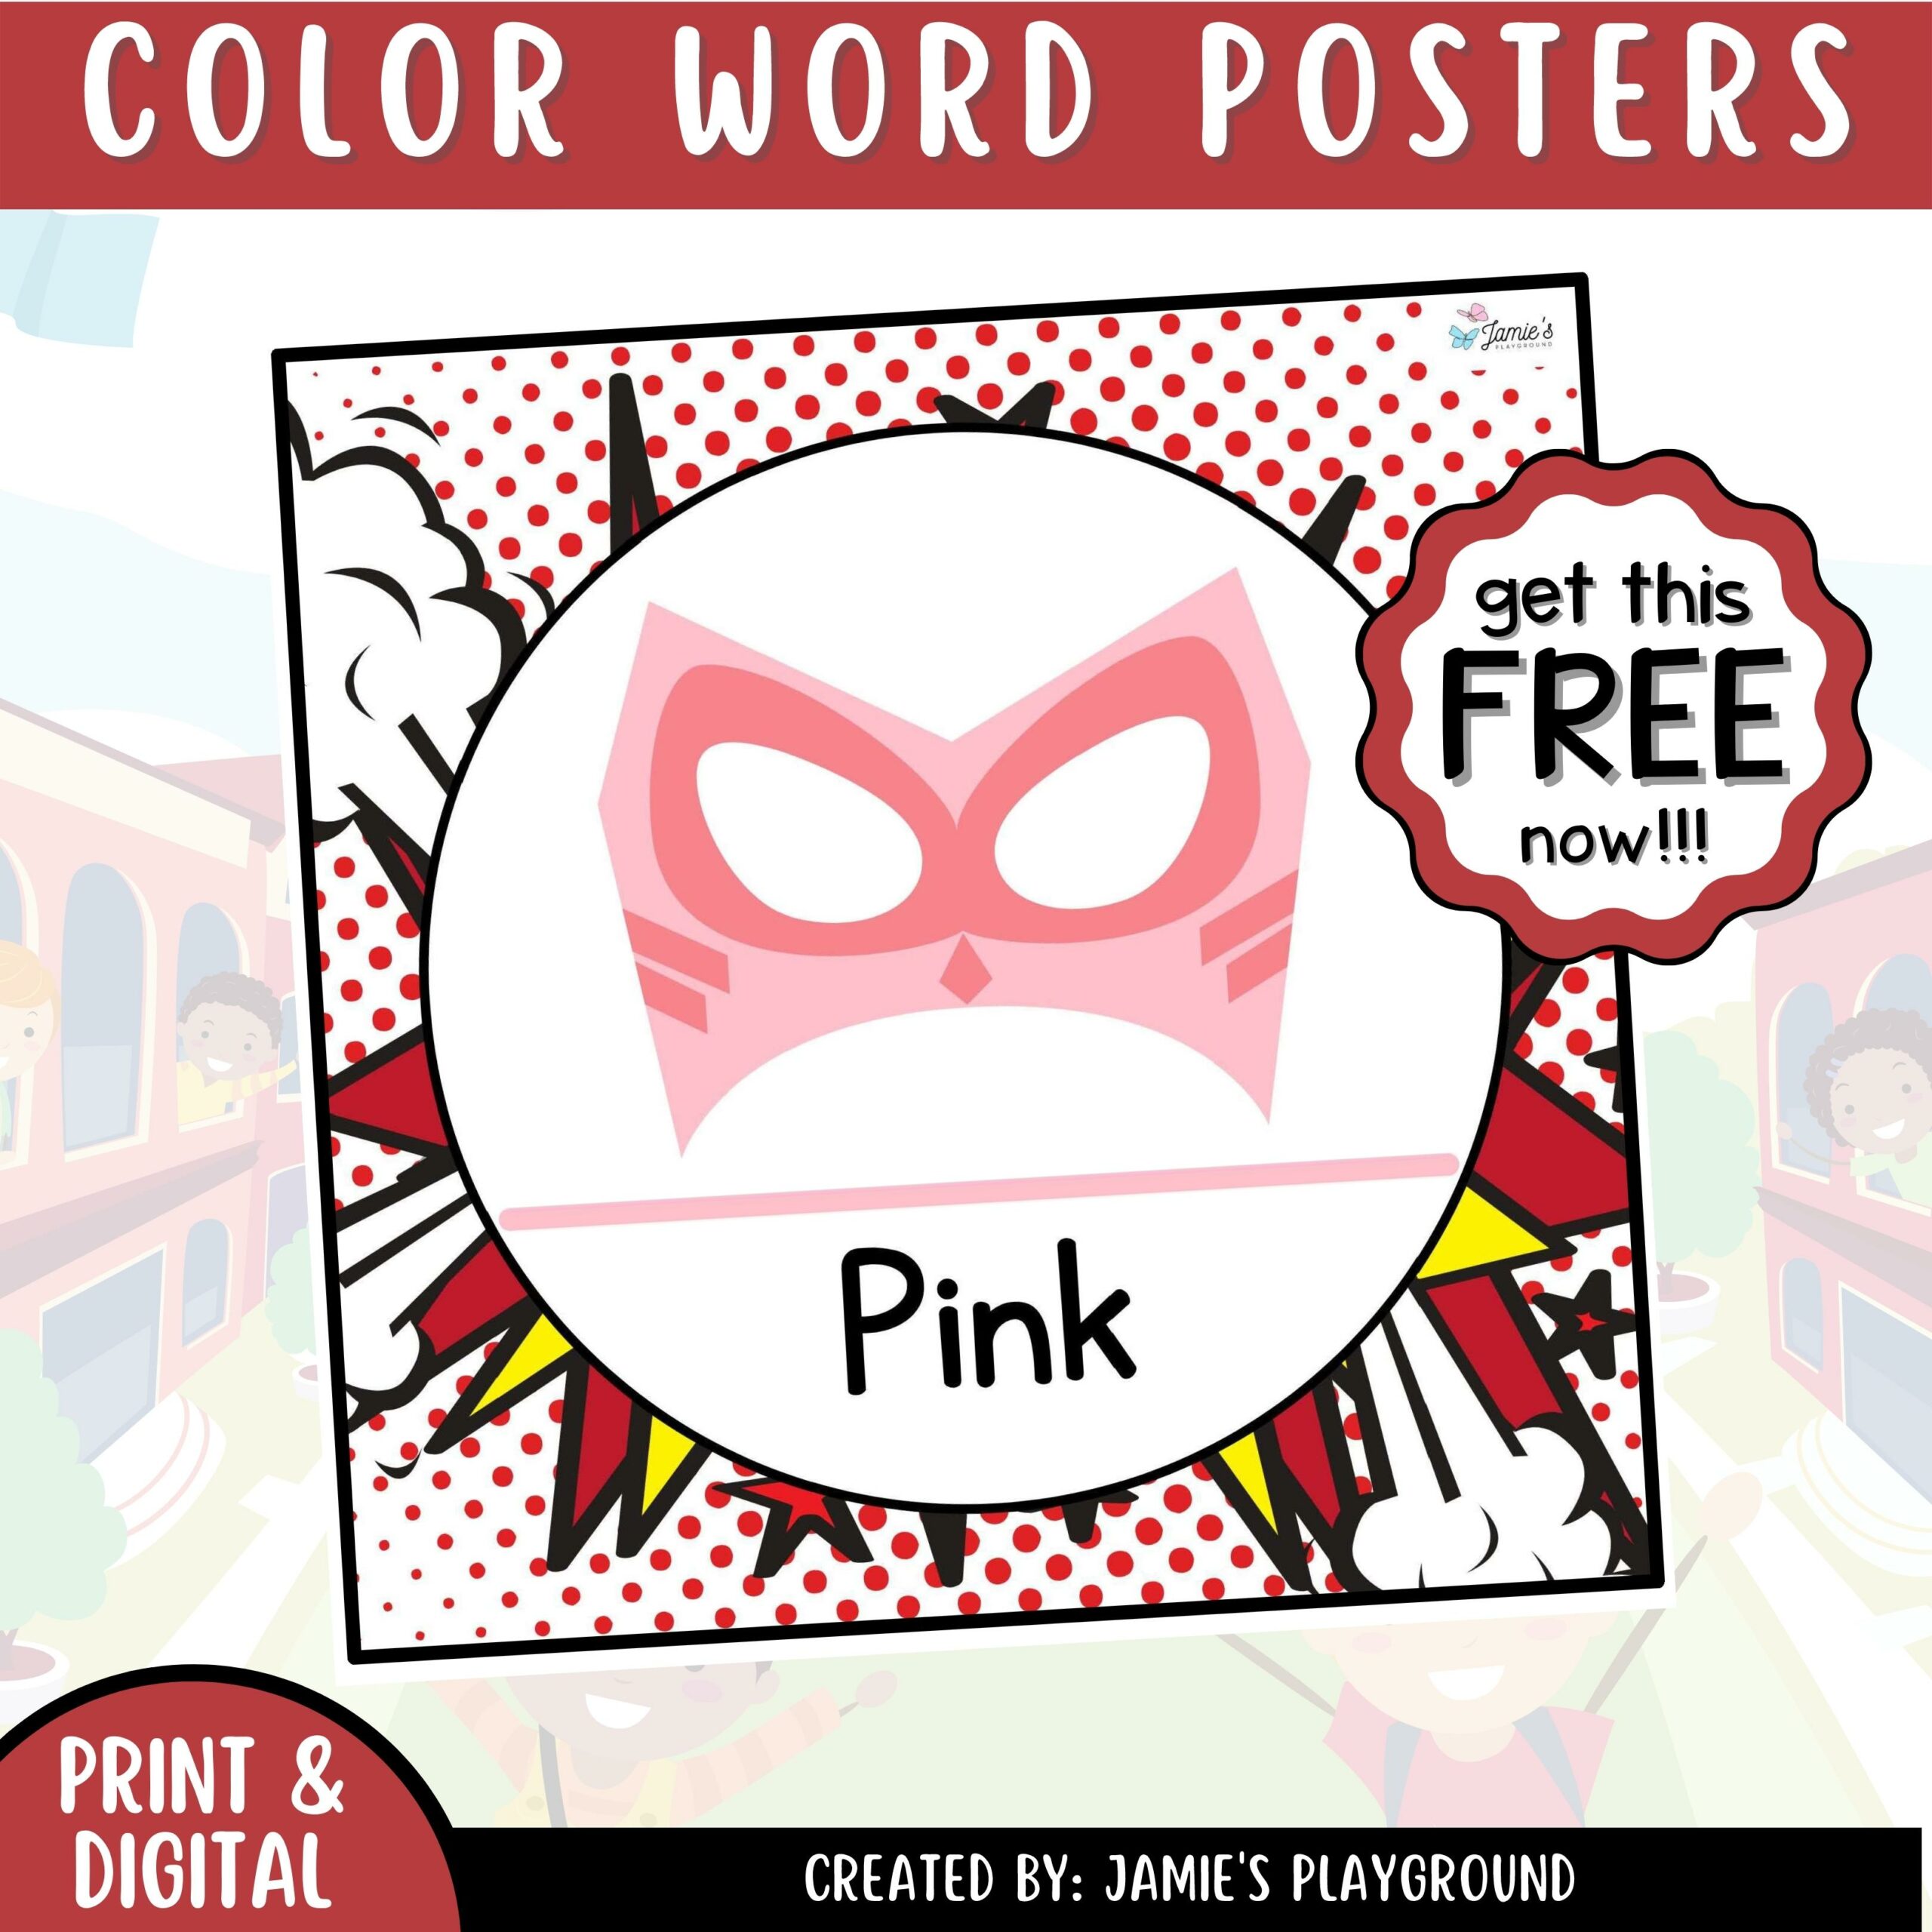 FREE - Color Word Poster 2: Color Word Classroom Sign's featured image